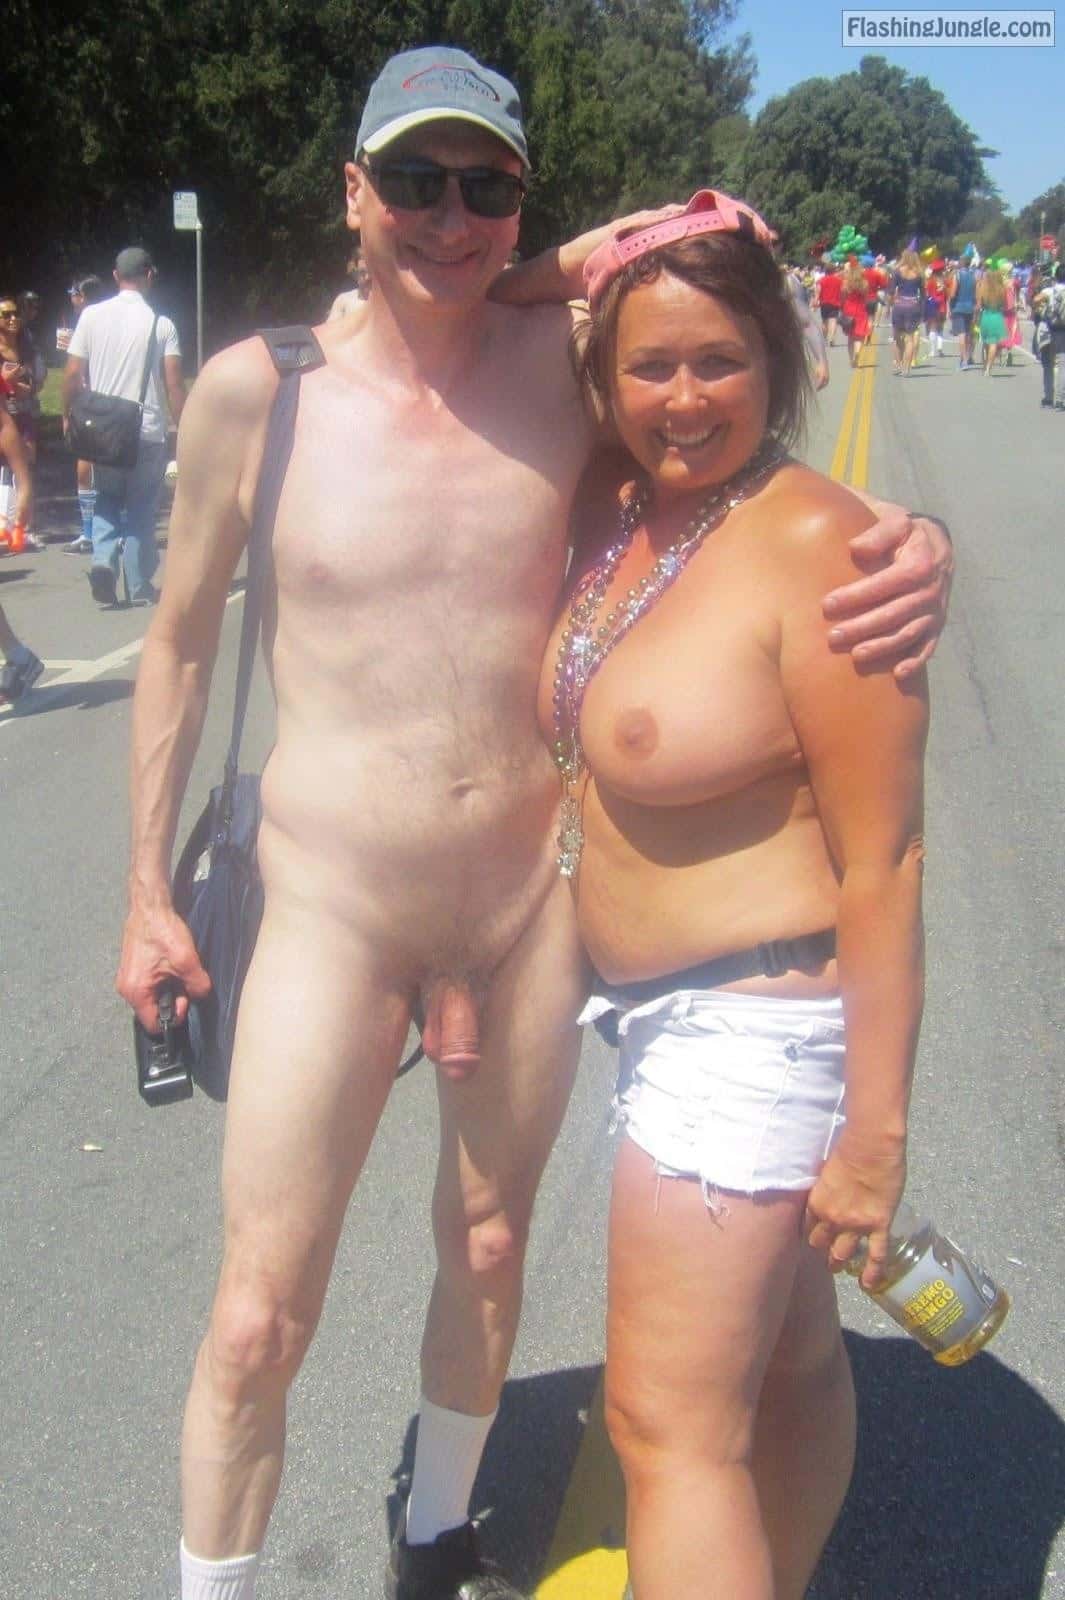 Public Nudity Pics: Topless Girl Public Nudity Exhibitionist Brucie Bay to Breakers Flashers Naked man flasher exhibitionist Brucie caught exposing his penis nude in public with sexy topless girl, MILF, flashing her big boobs, naked couple at San Francisco Bay to Breakers, nudists,...